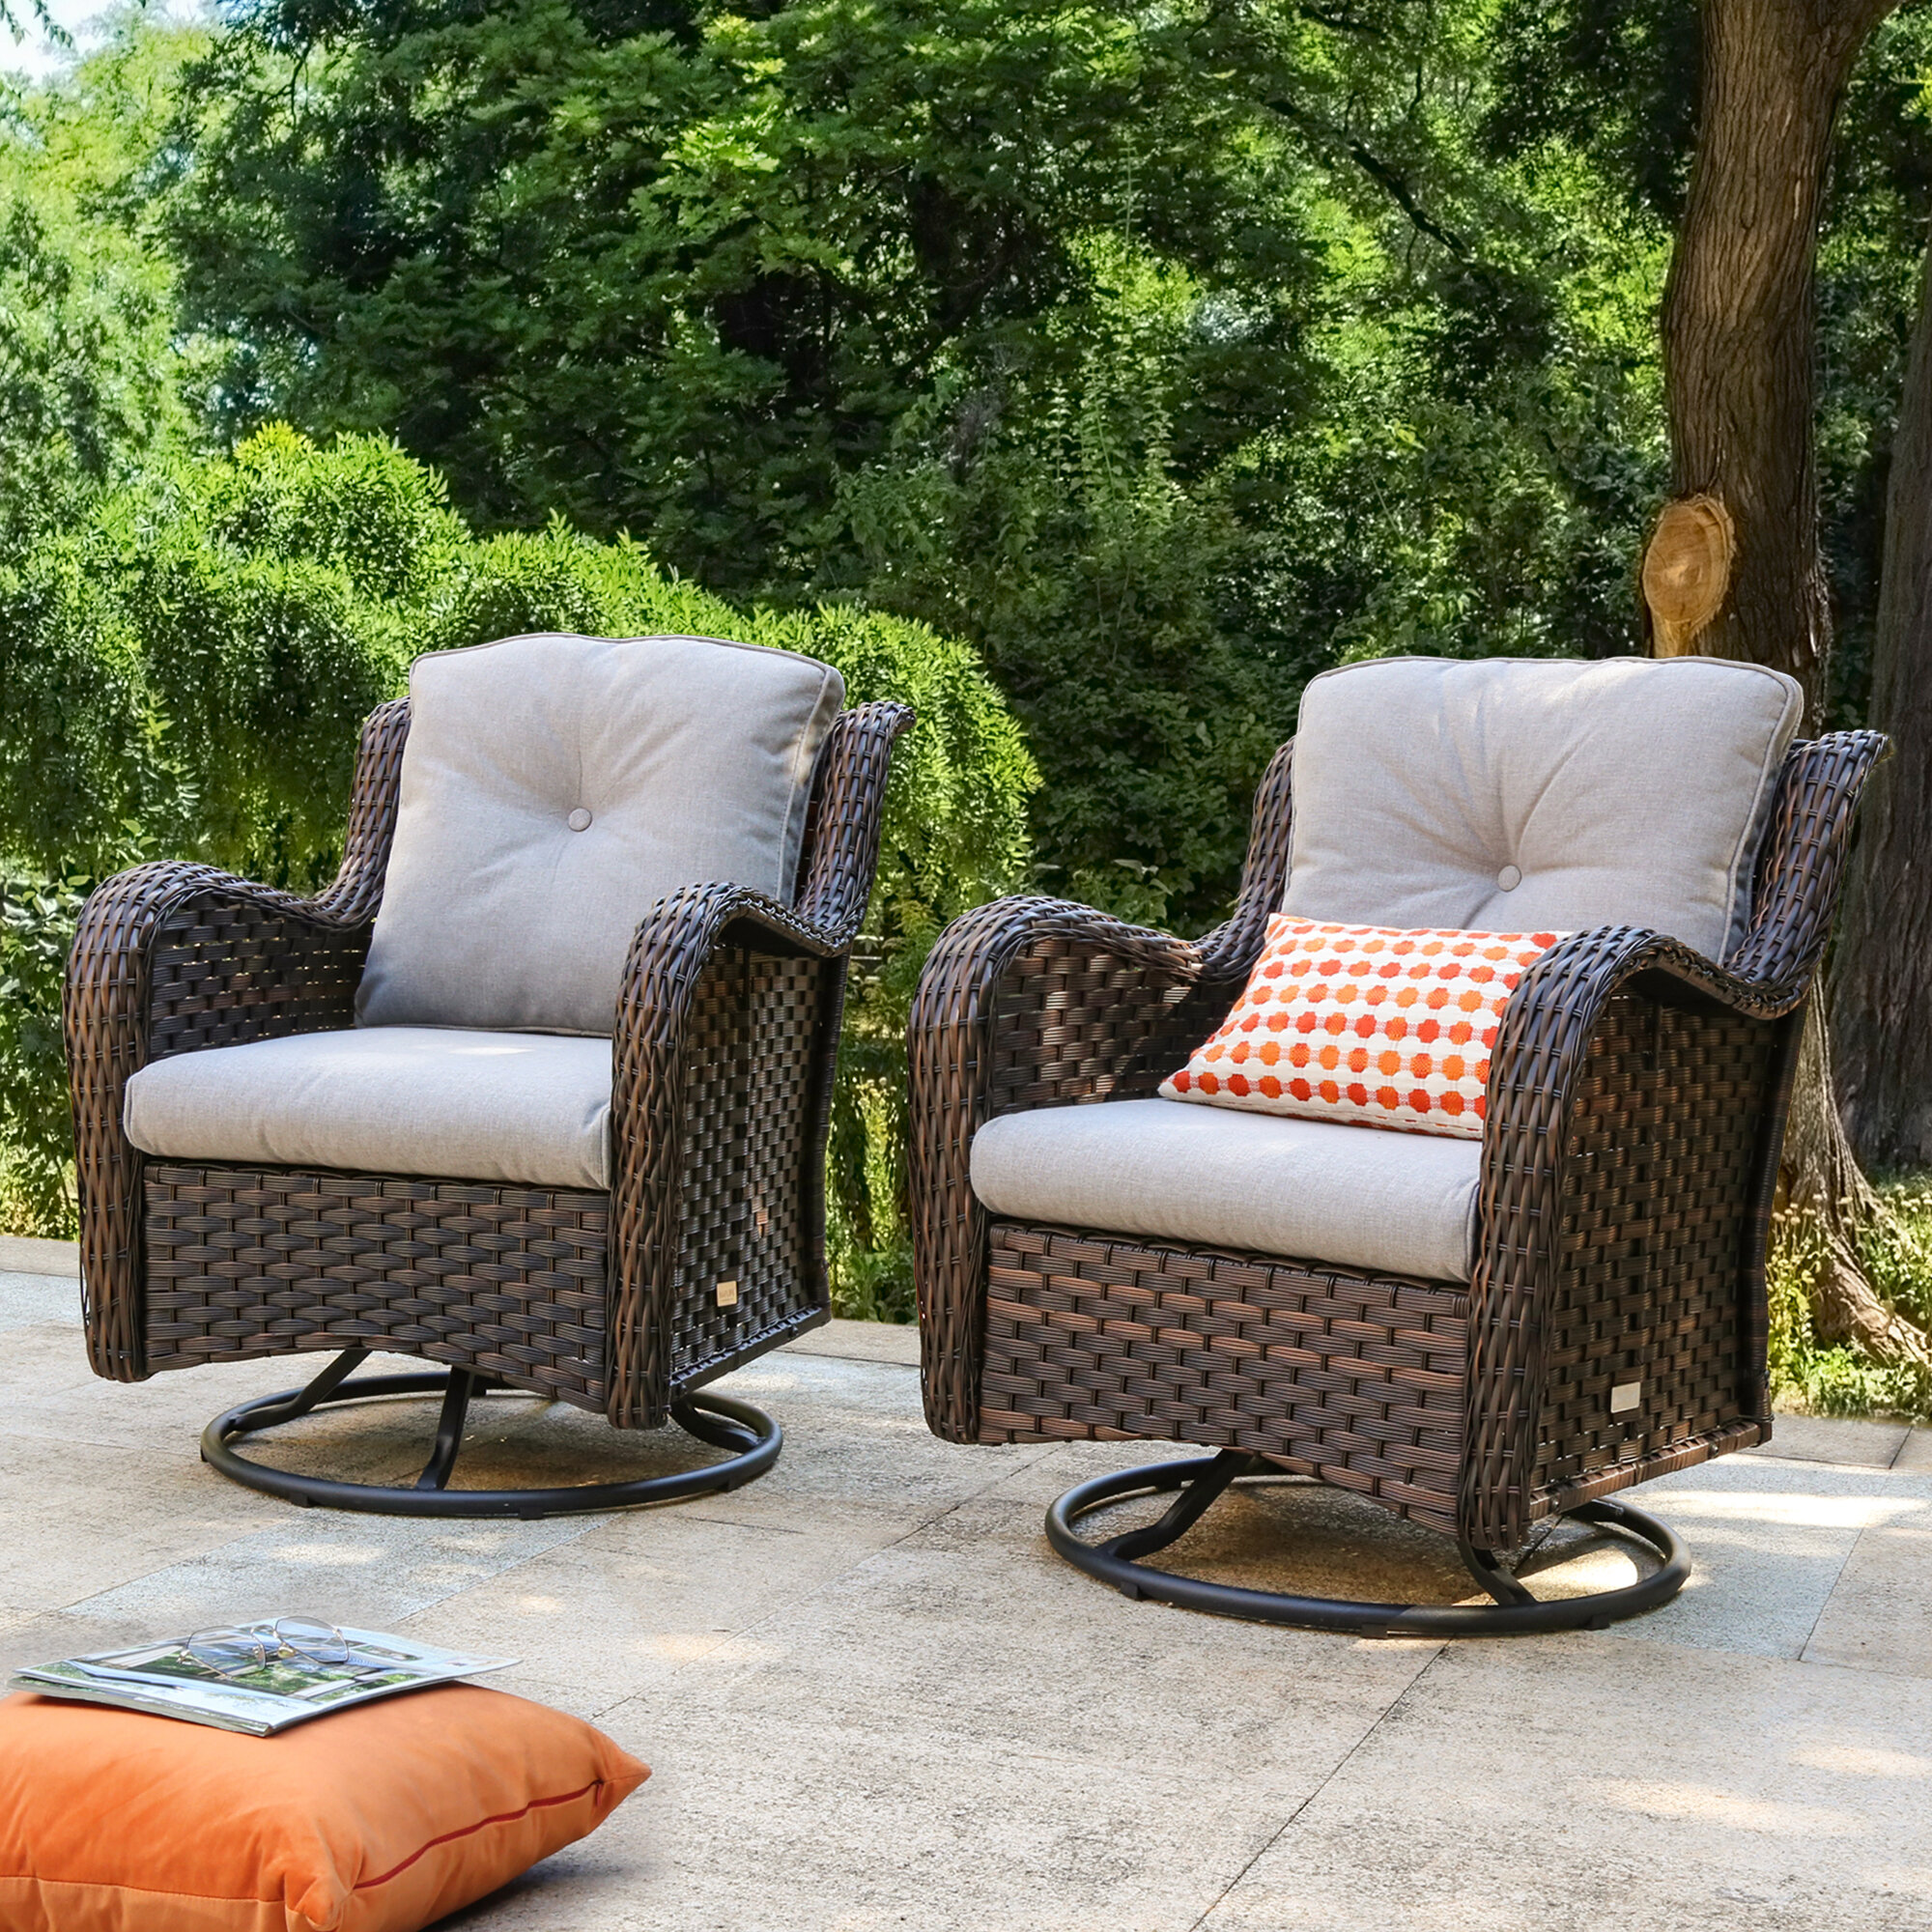 Sea Island Wicker Patio Lounge Chair Set With Red Cushion Set of 2